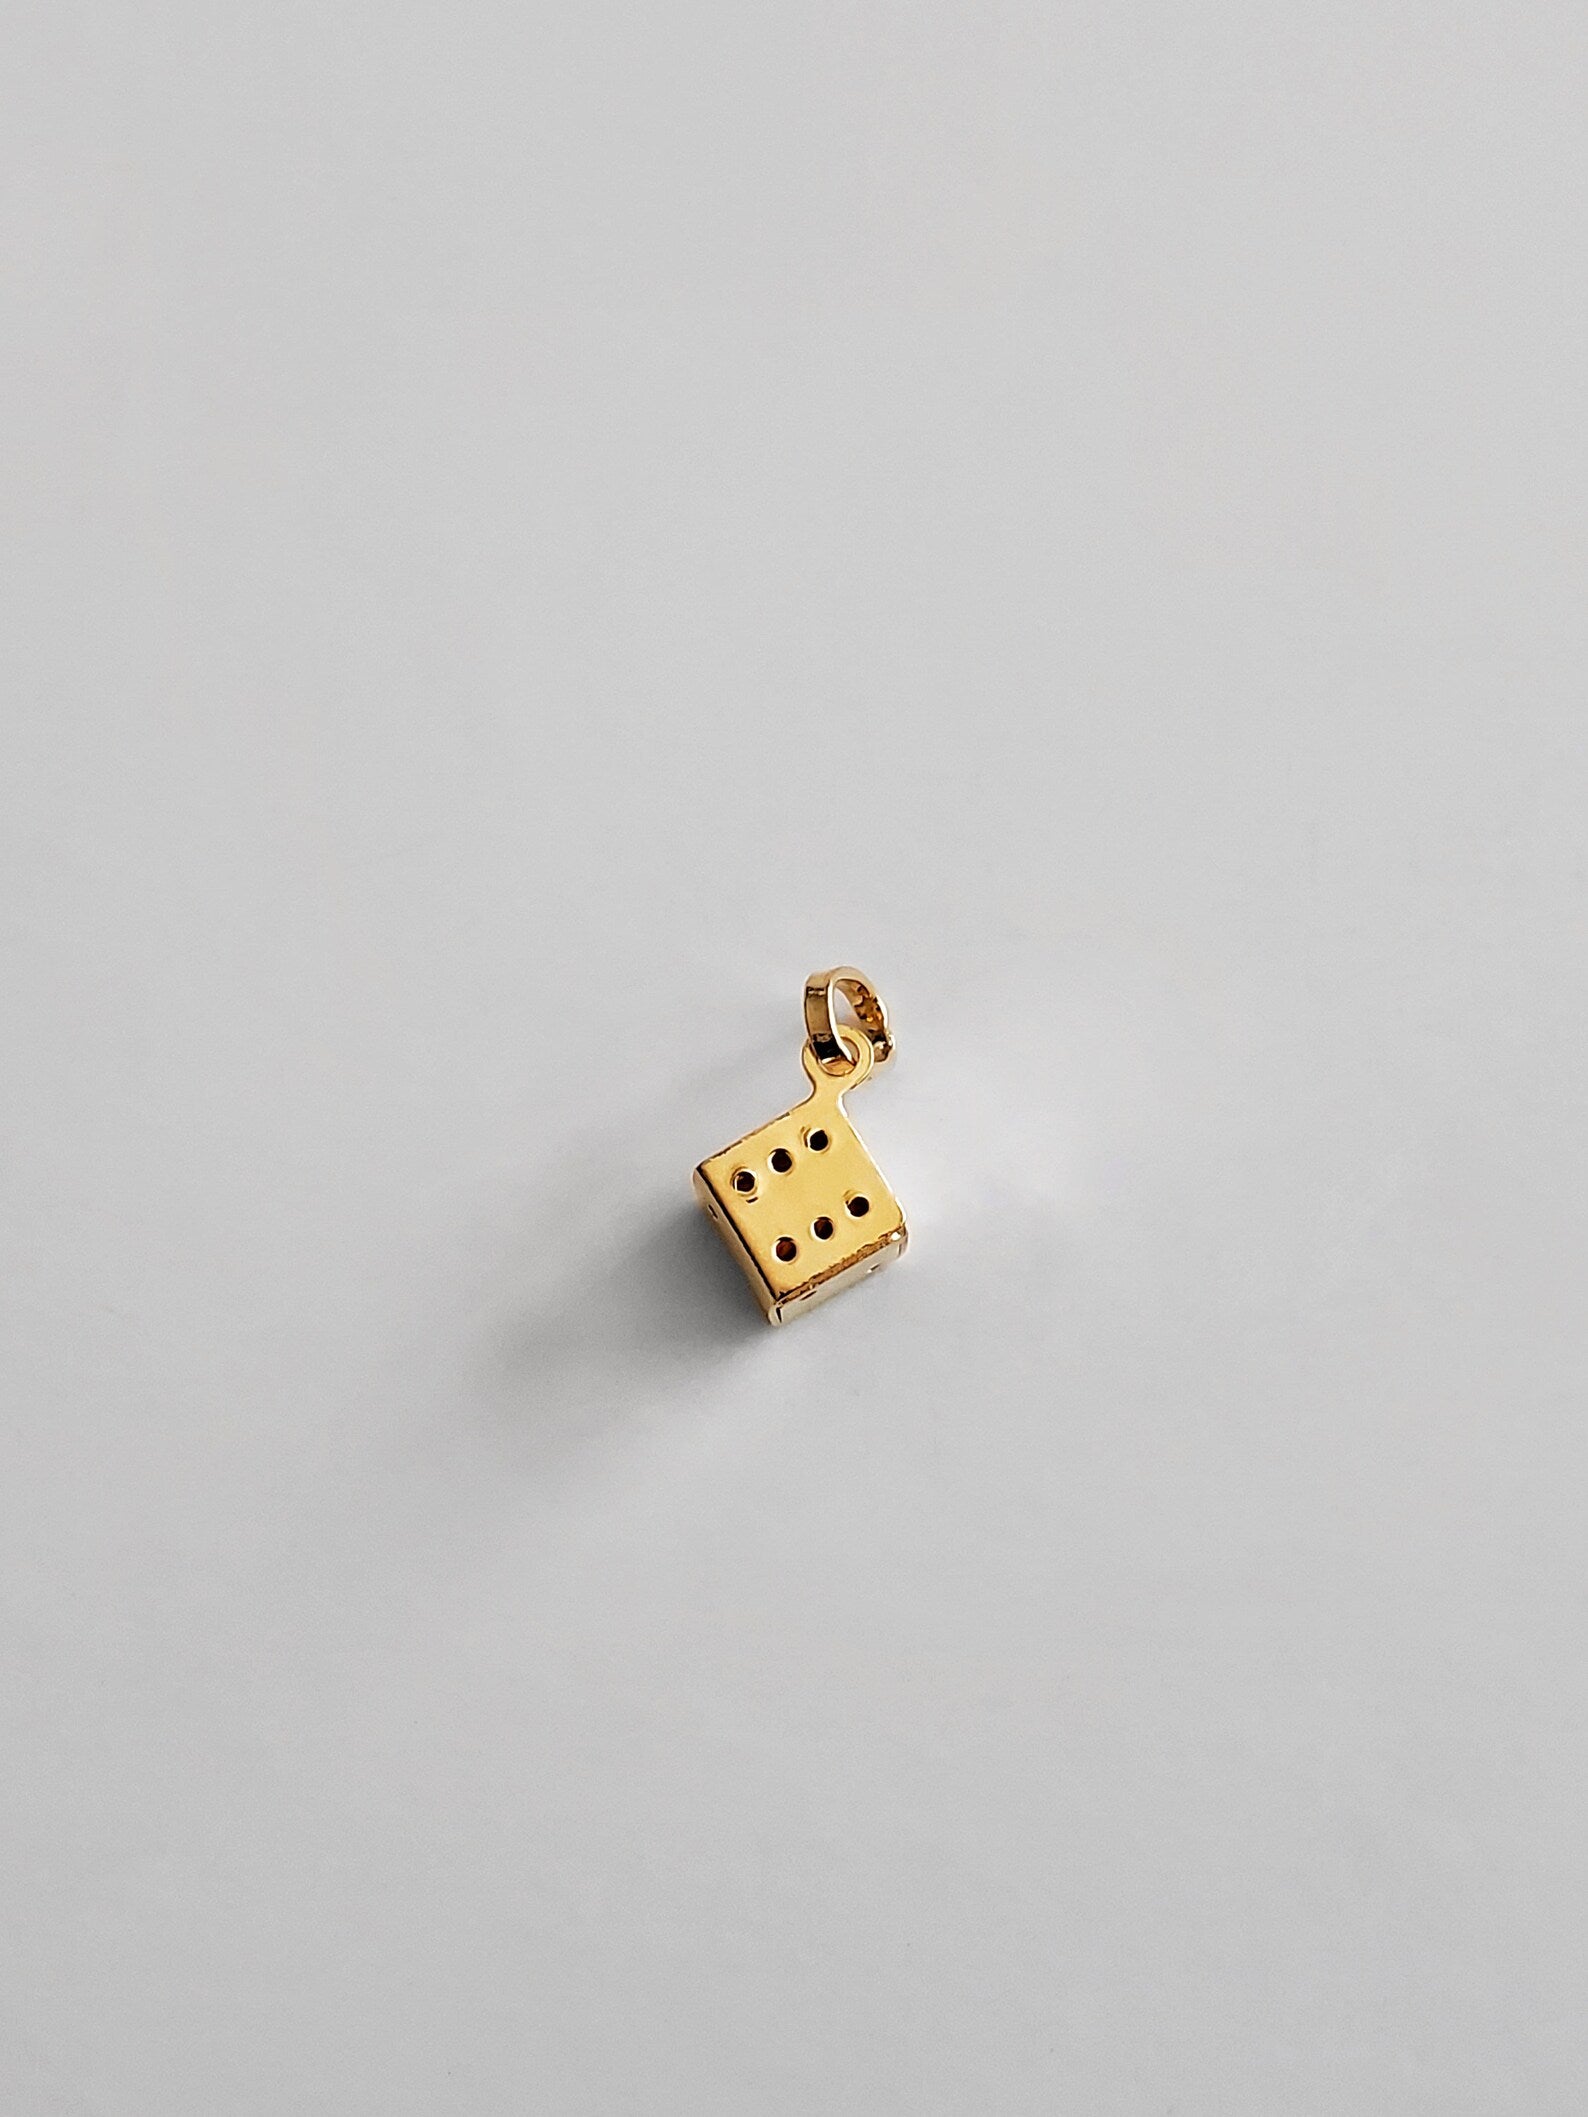 14k Gold 3D Dice Pendant Model-461 - Charlie & Co. Jewelry